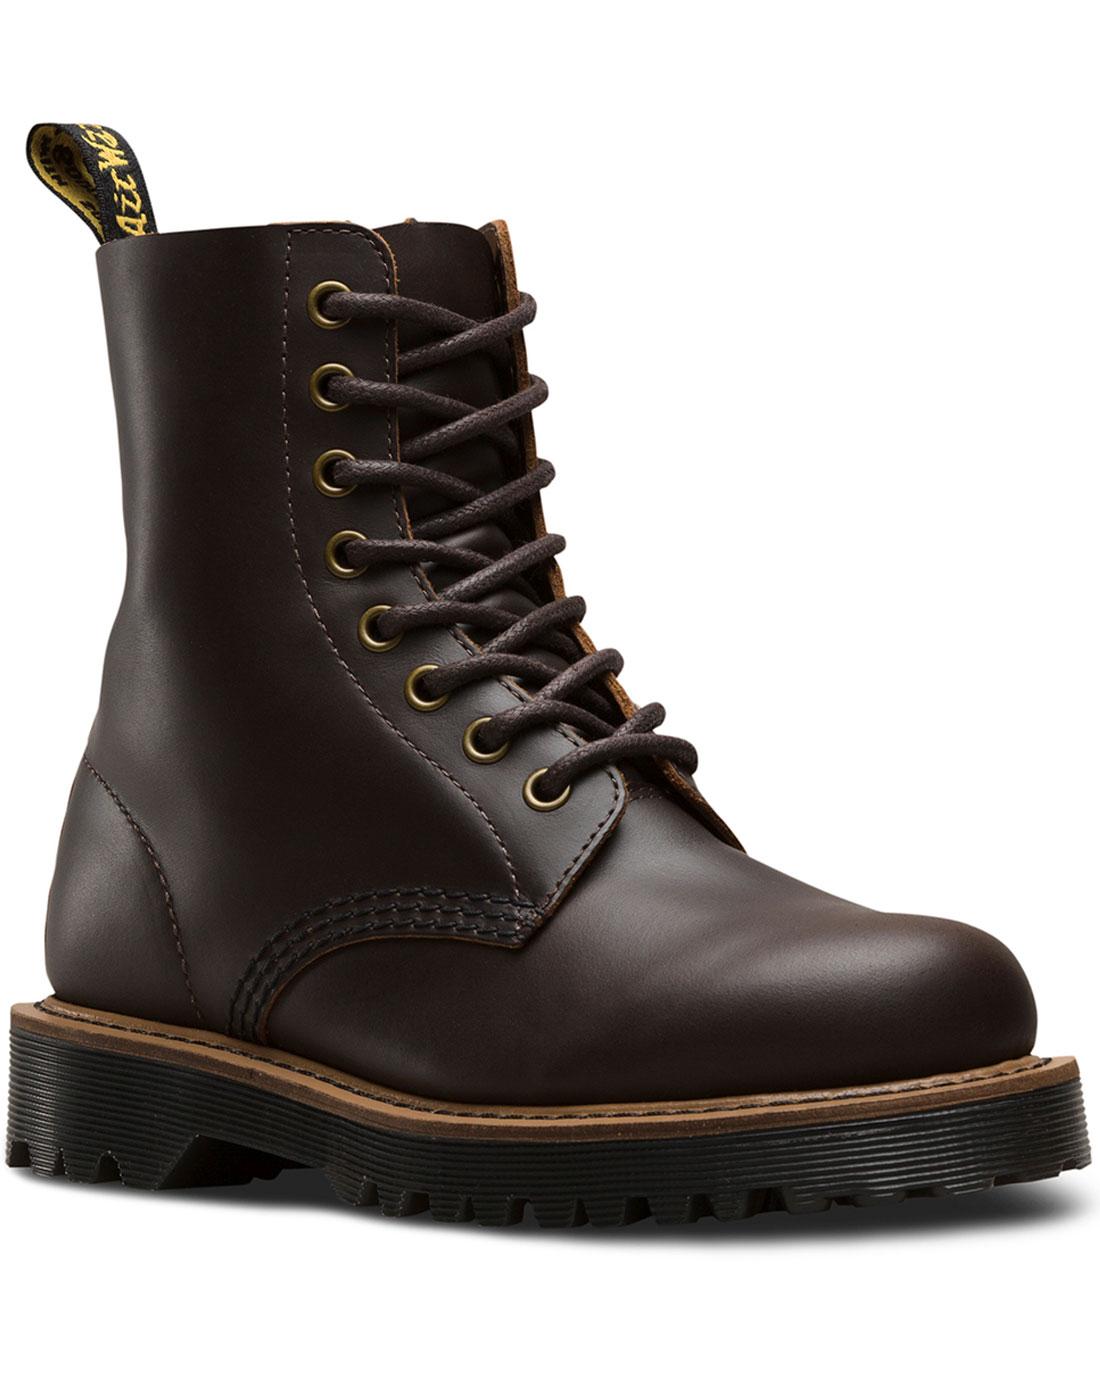 Pascal II DR MARTENS Retro Mod Montelupo Boots DB